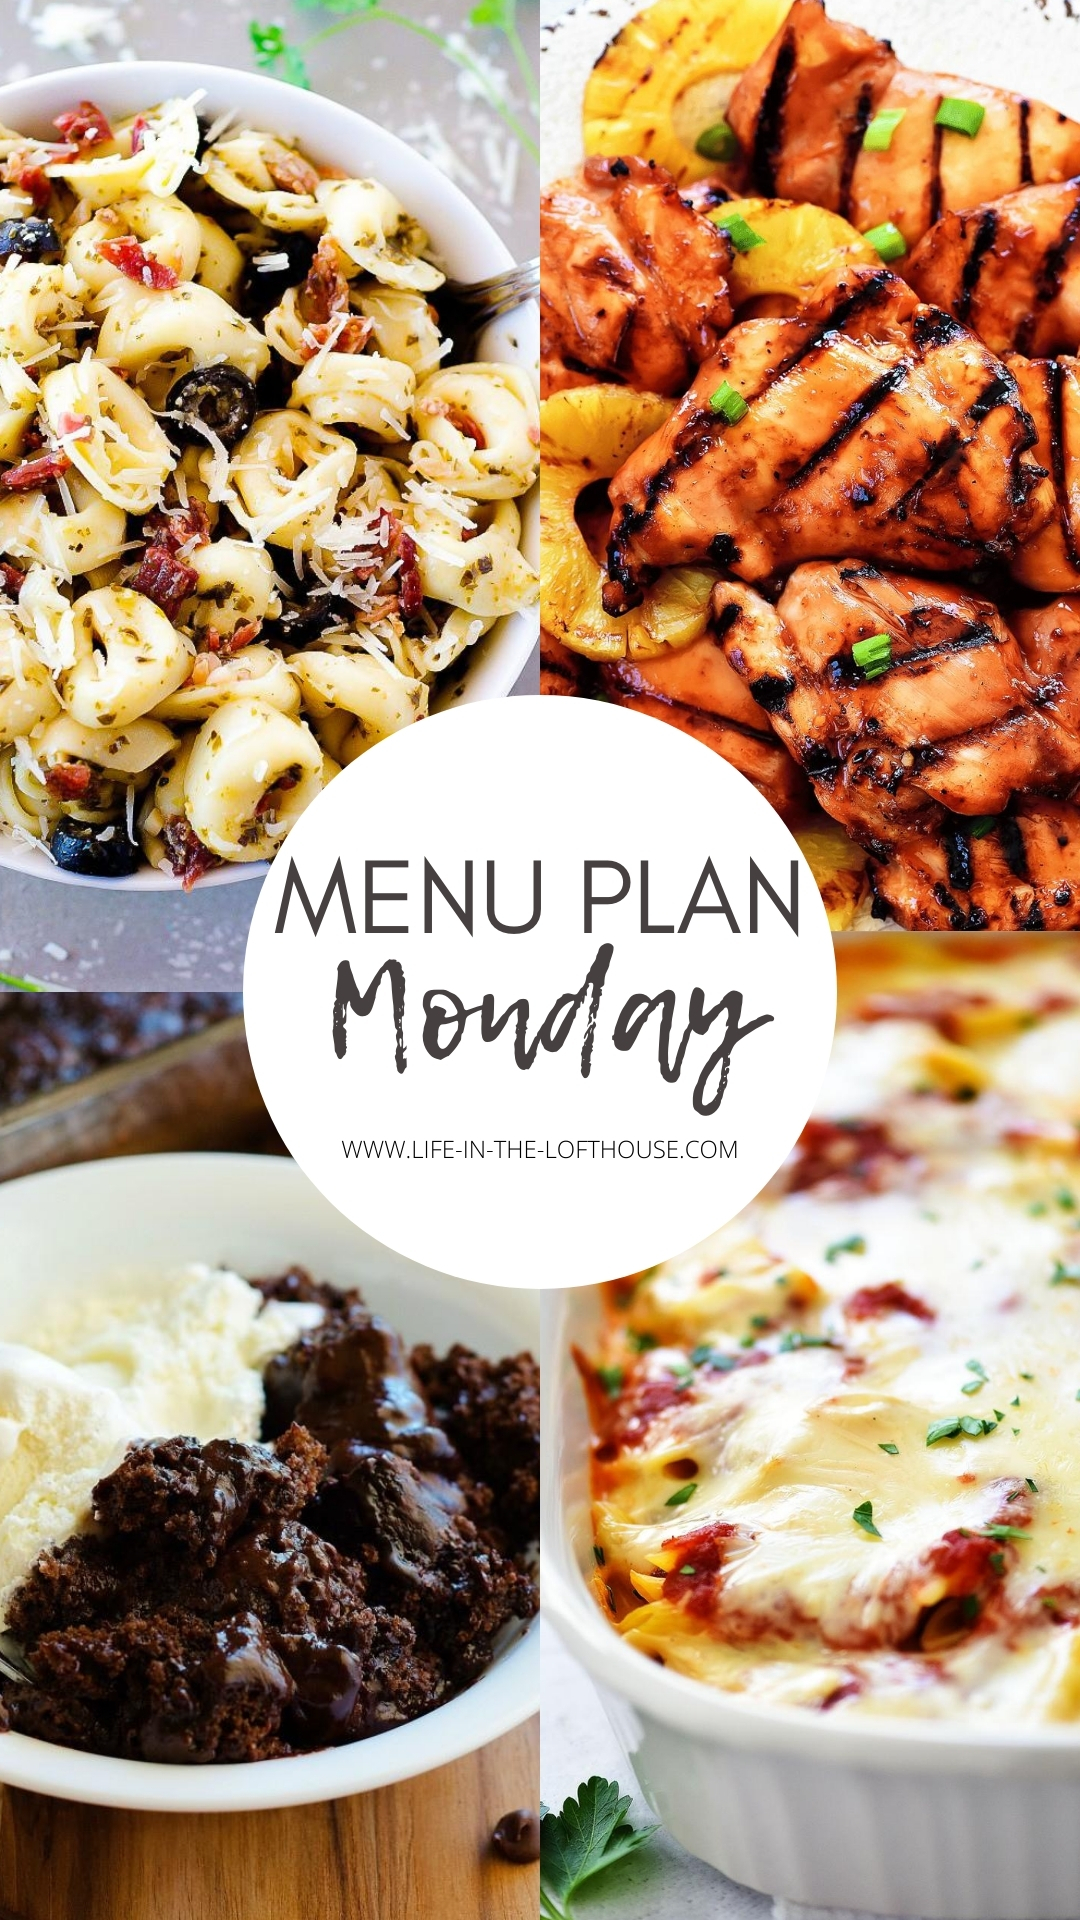 Menu Plan Monday is your guide to getting delicious and easy meals on the dinner table. All of the recipes are tried and true family favorite meals! Life-in-the-Lofthouse.com